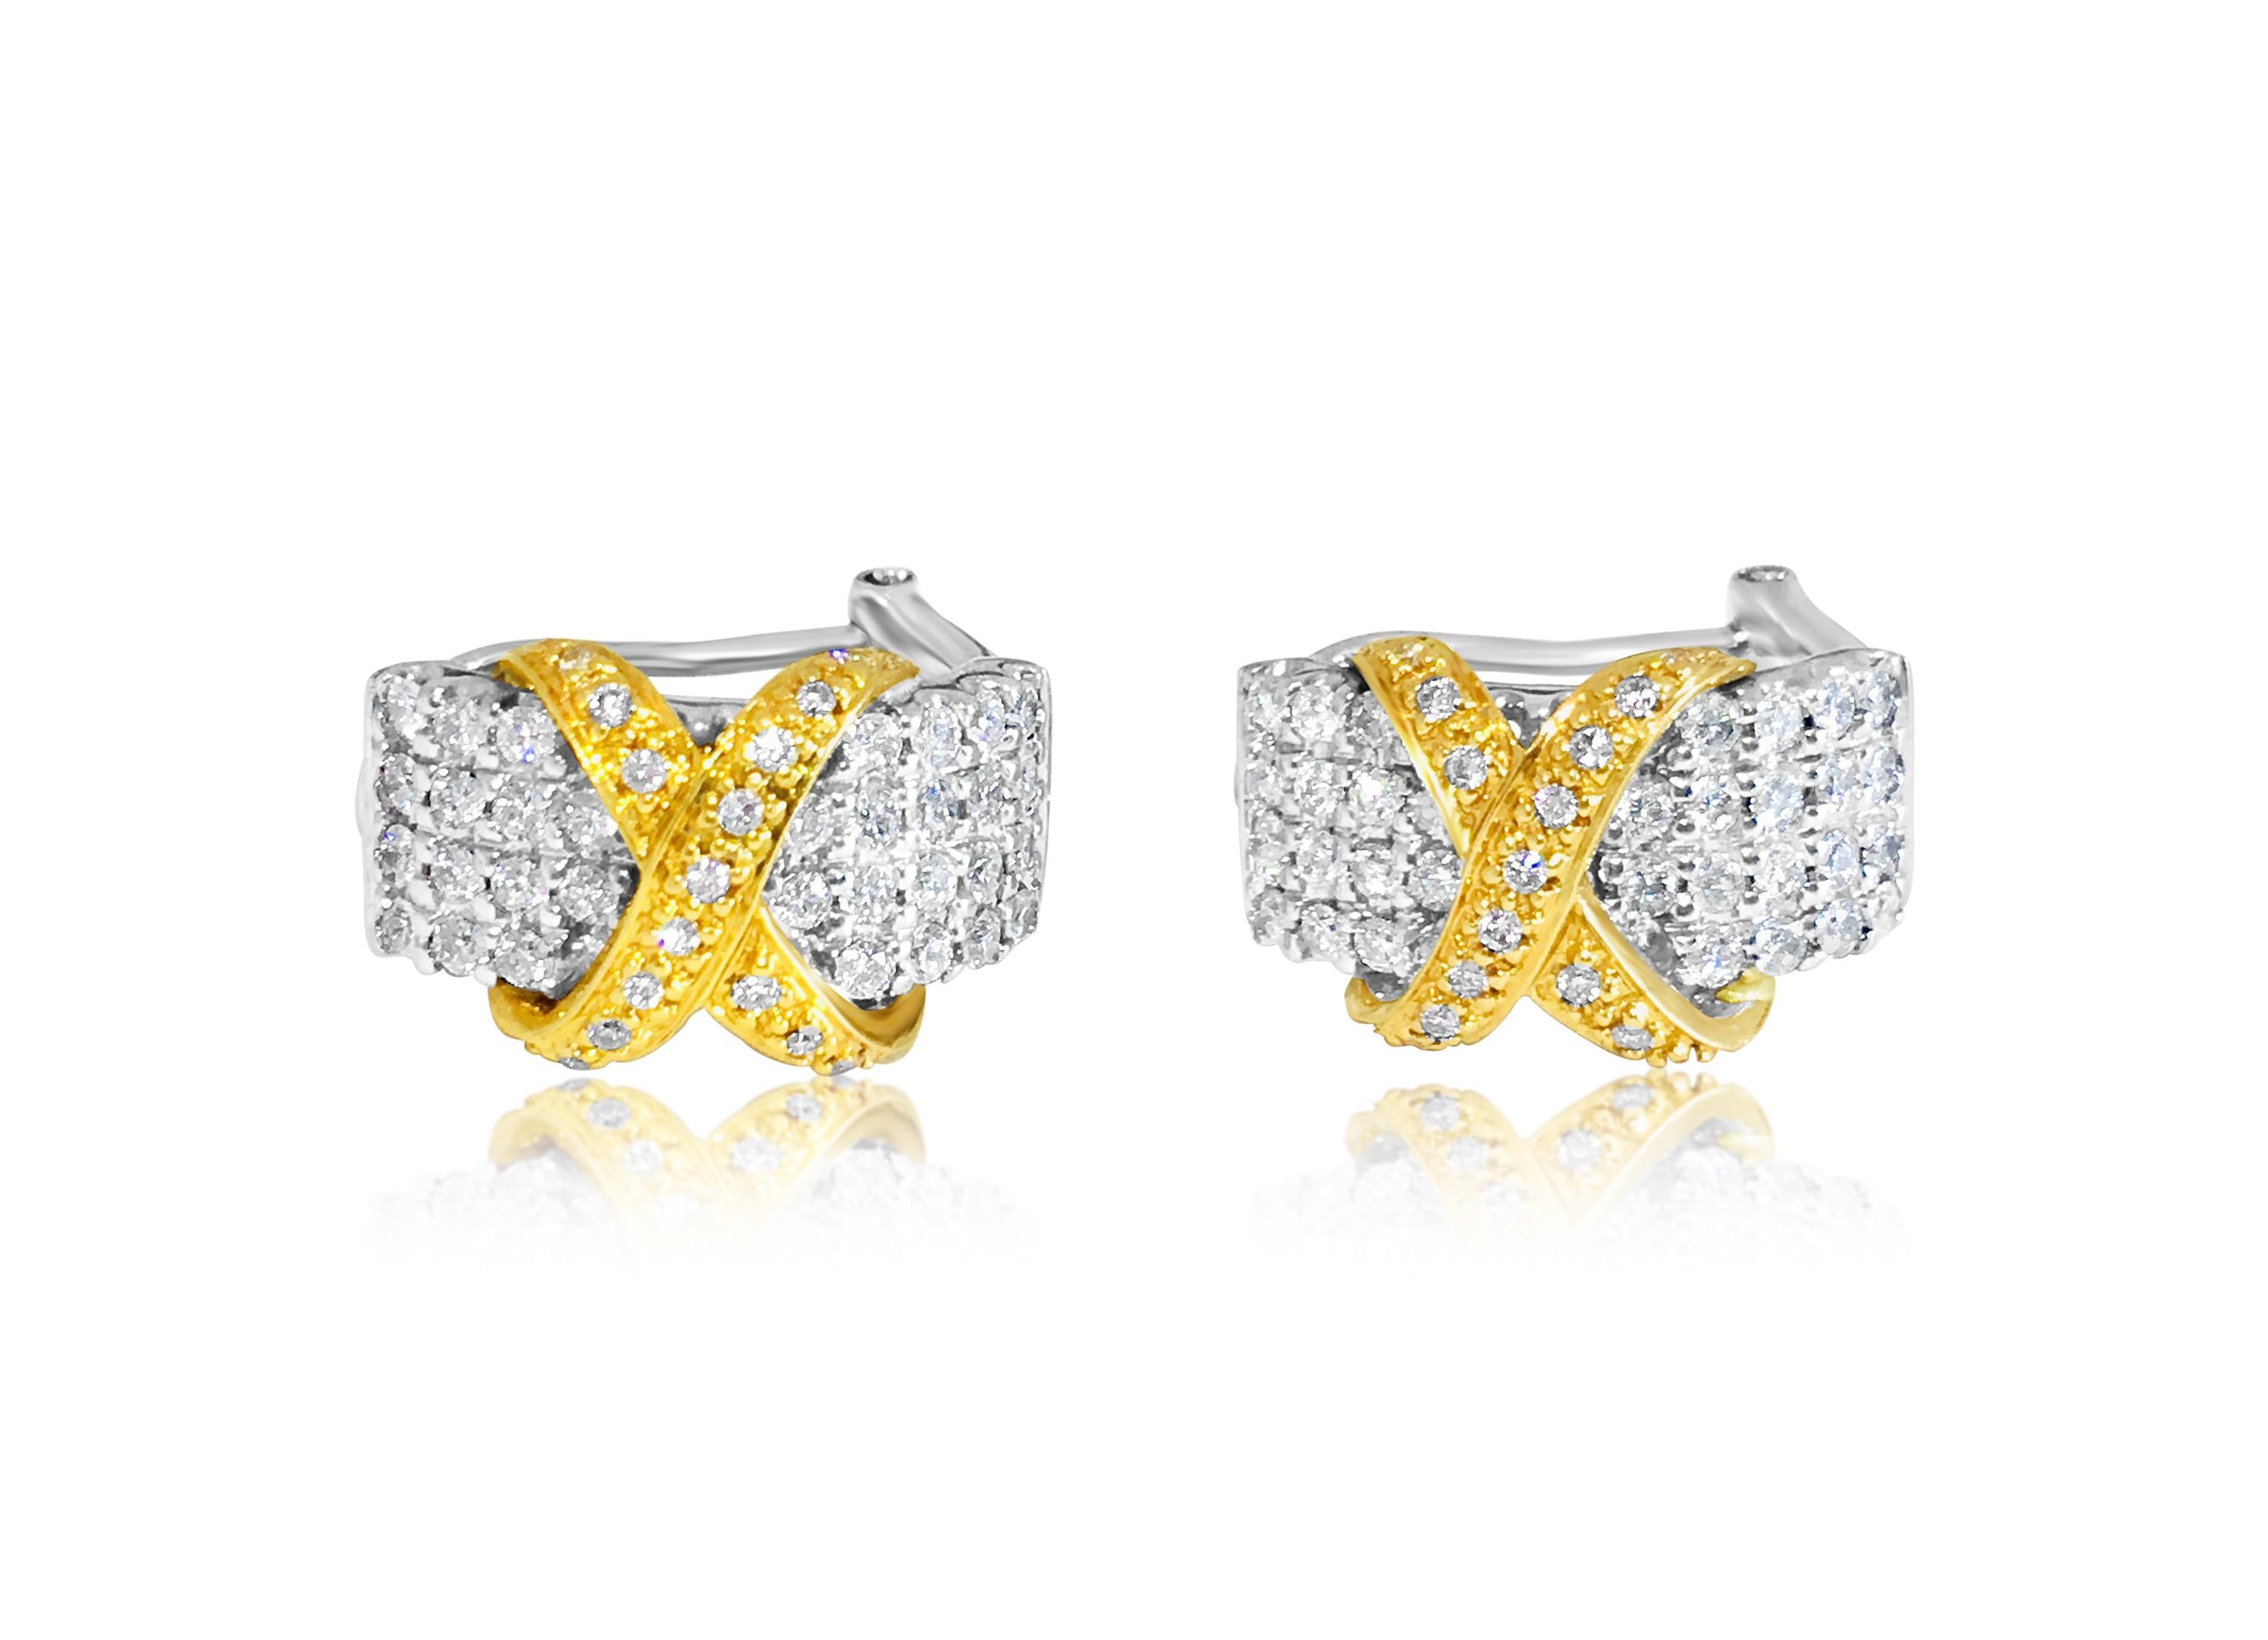 Fashioned from exquisite 18K two-tone gold, featuring both white and rose gold elements, these stunning earrings showcase a total of 2.00 carats of round brilliant cut diamonds. With VS clarity and F-G color, these diamonds radiate brilliance and